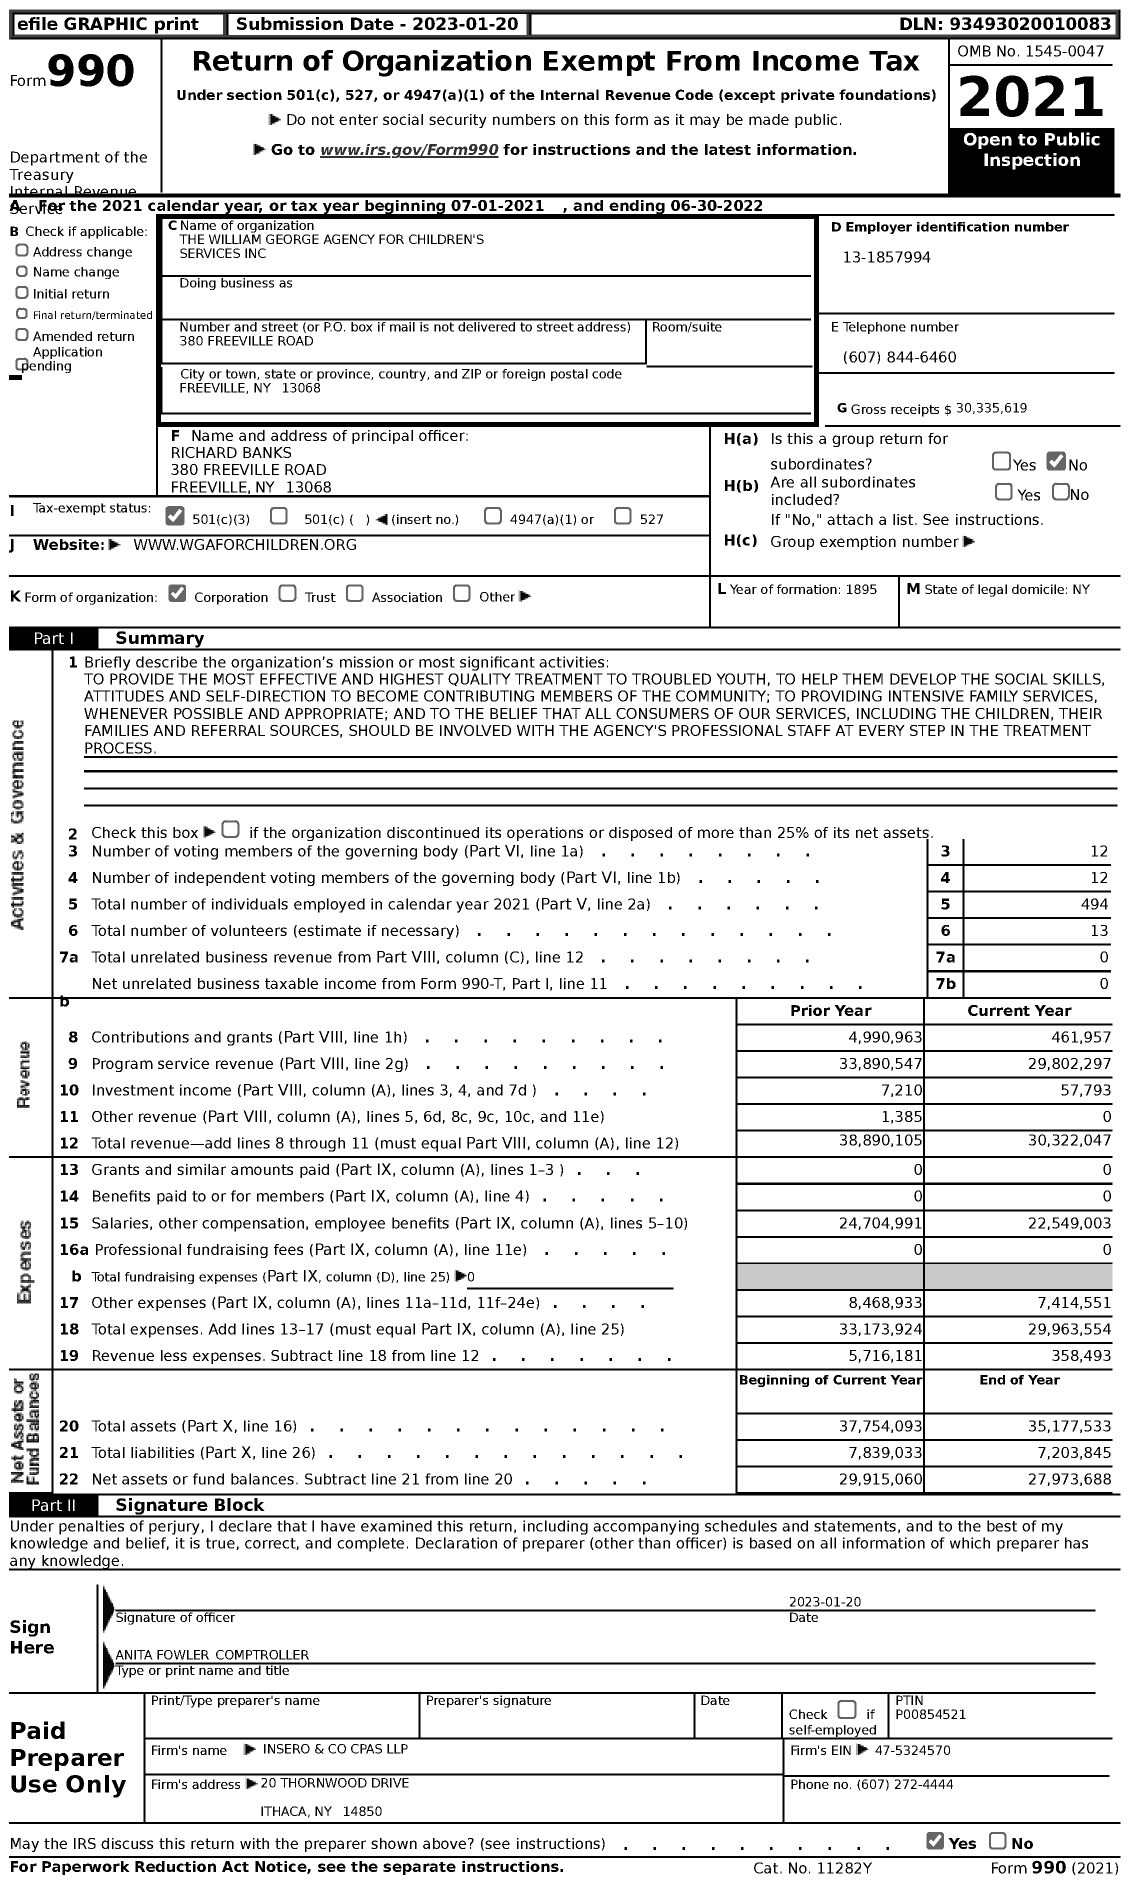 Image of first page of 2021 Form 990 for The William George Agency for Children's Services